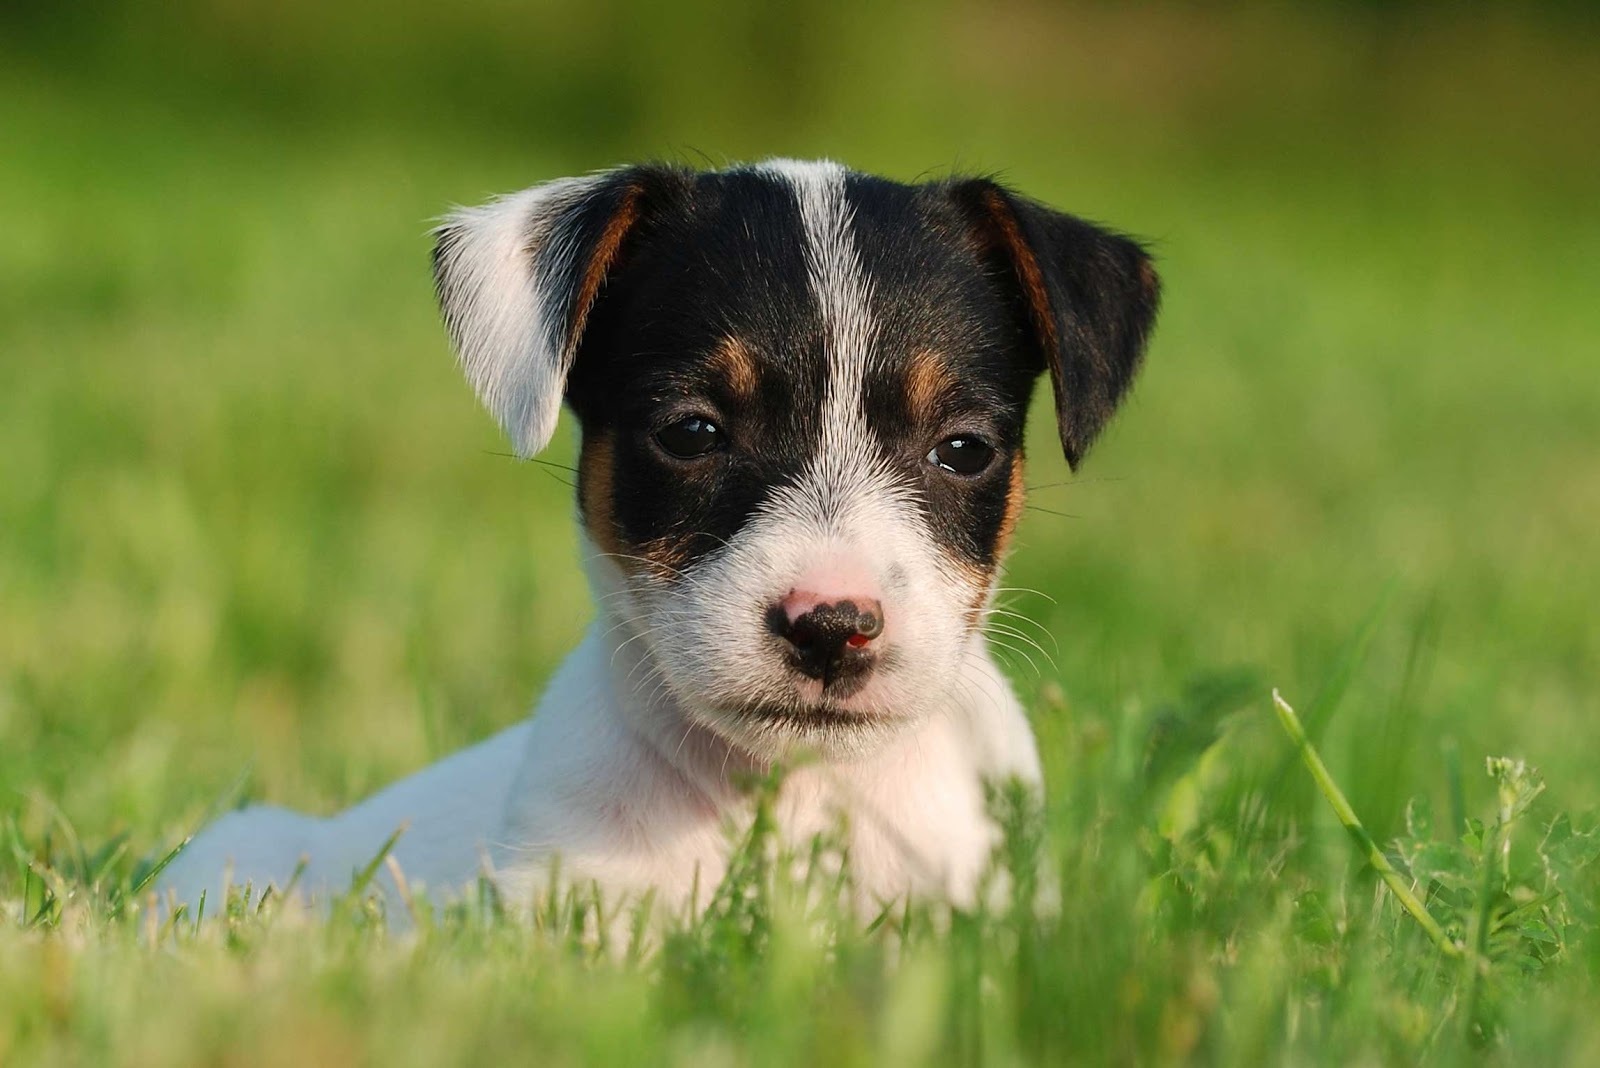 Adorable Jack Russell Puppy Dog Breed Wallpaper Dog Breeders Guide